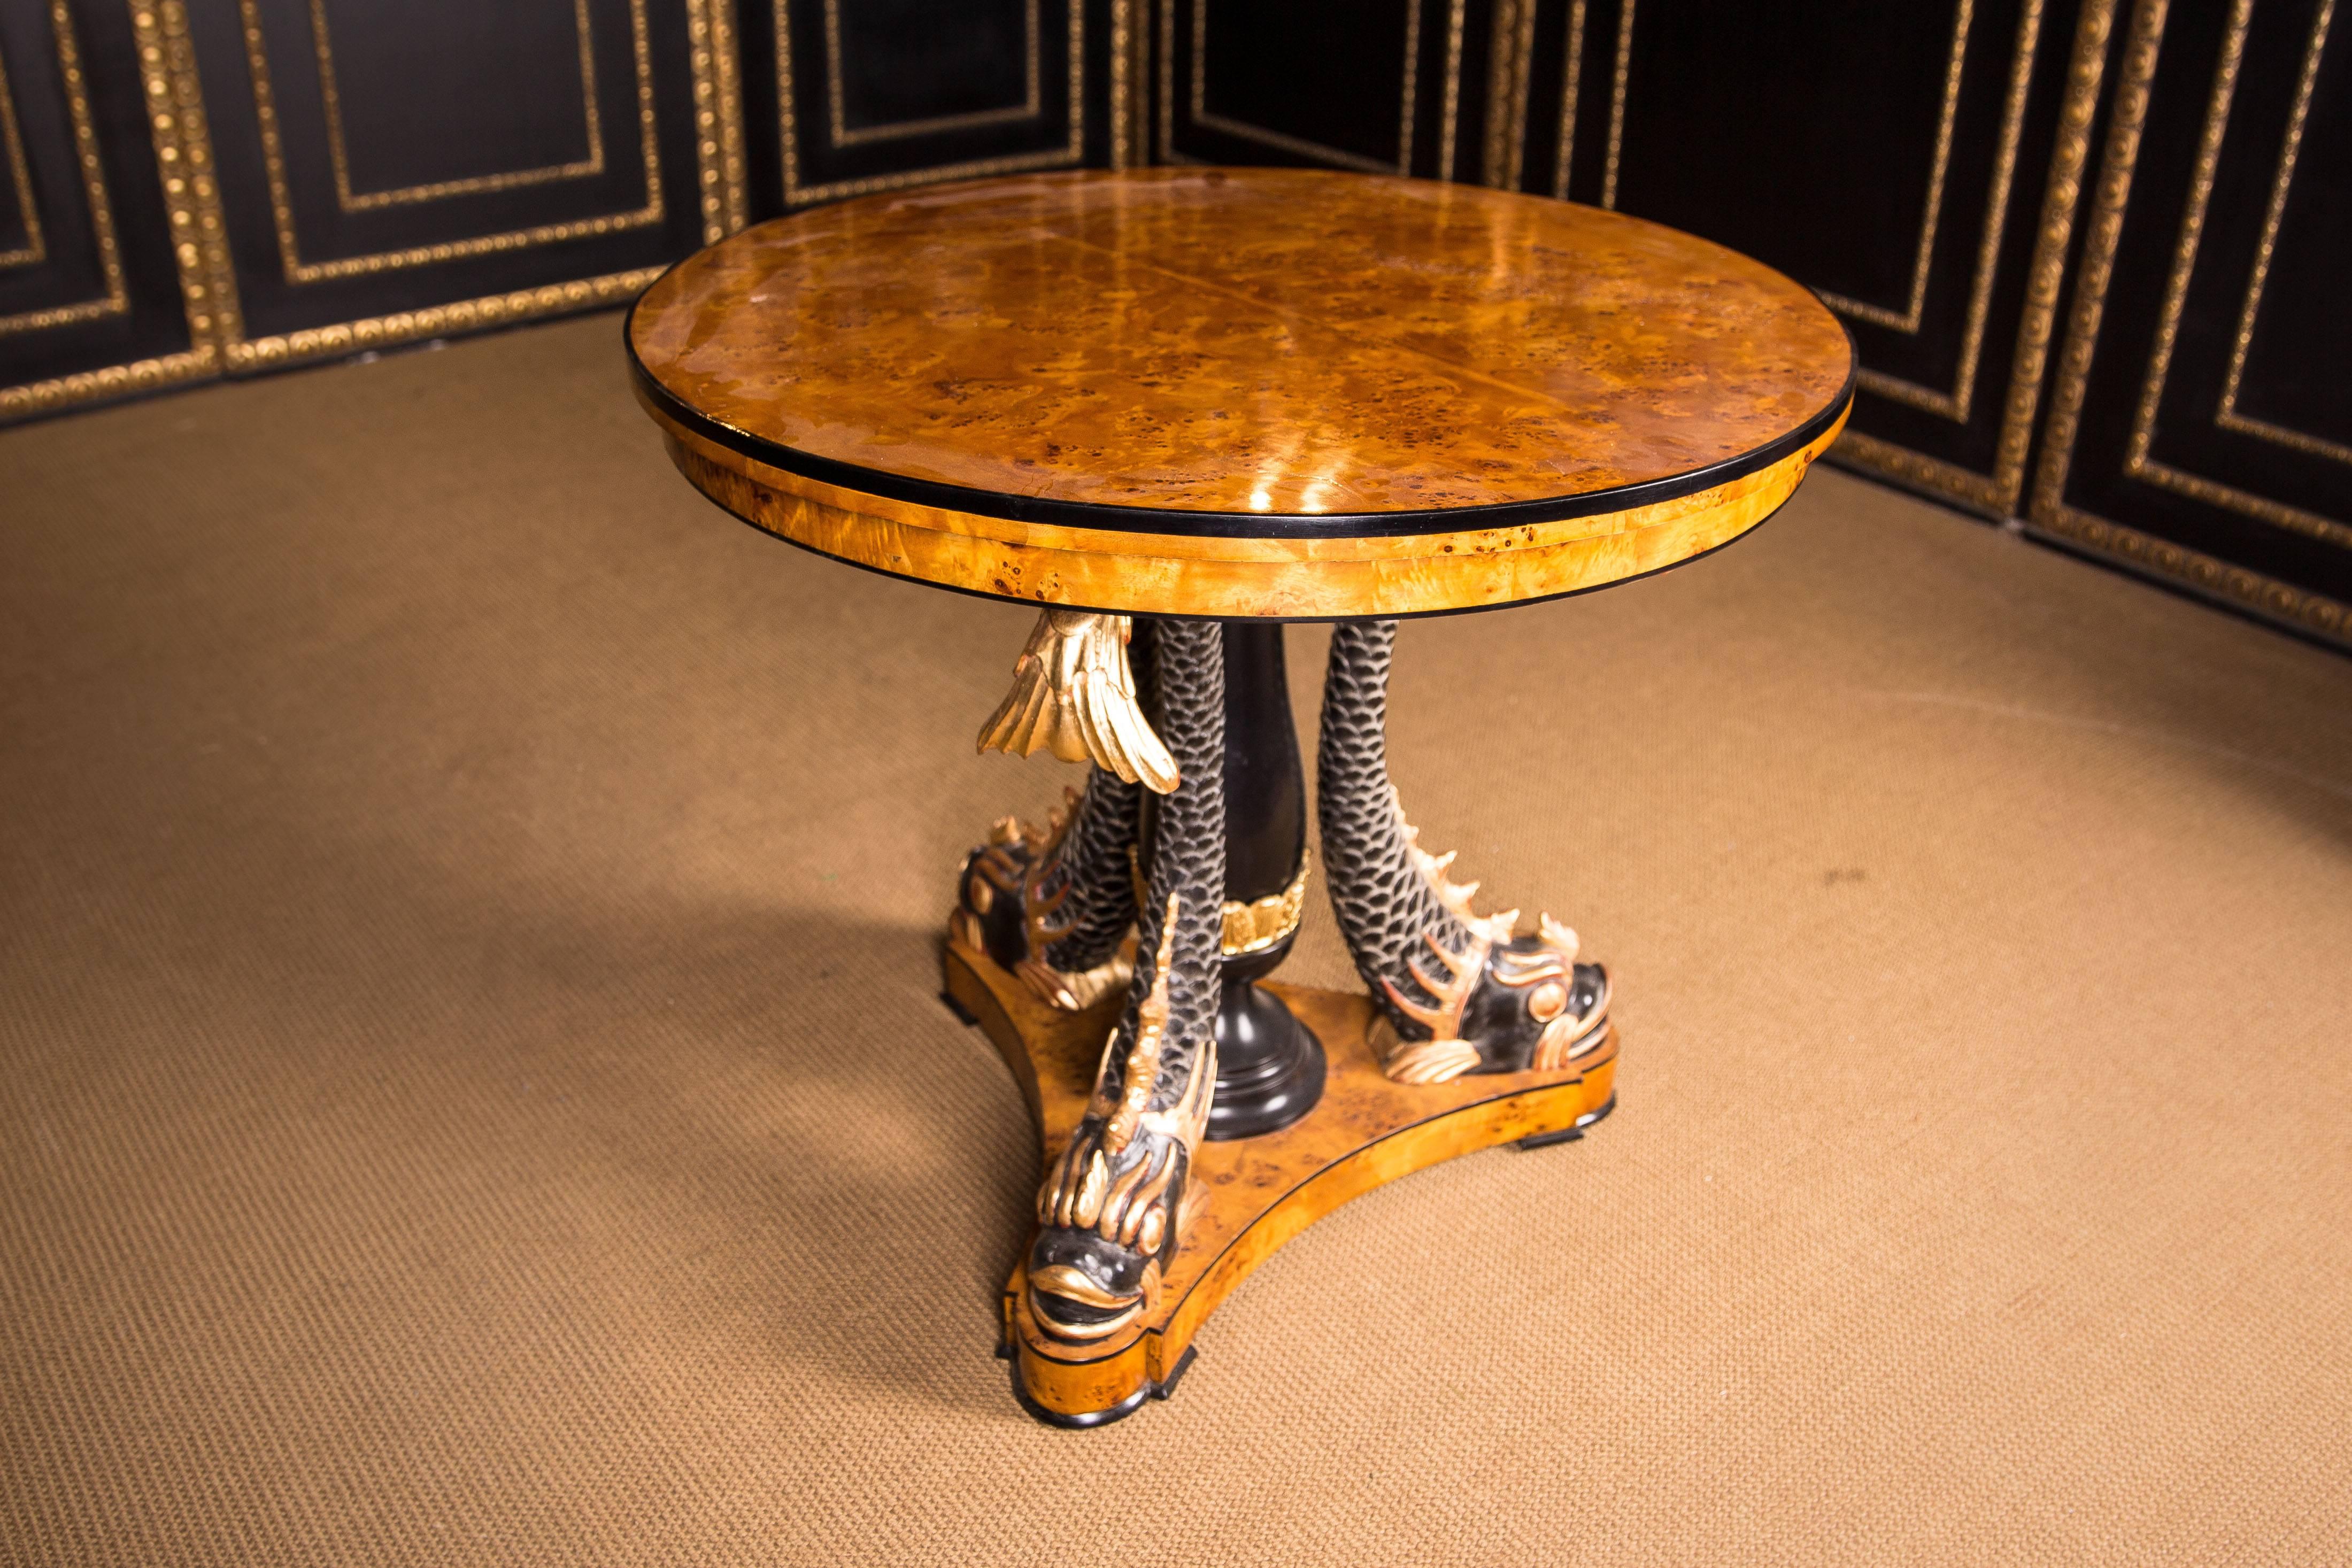 Birdseye Maple Majestic Table with Dolphins in the Empire Style